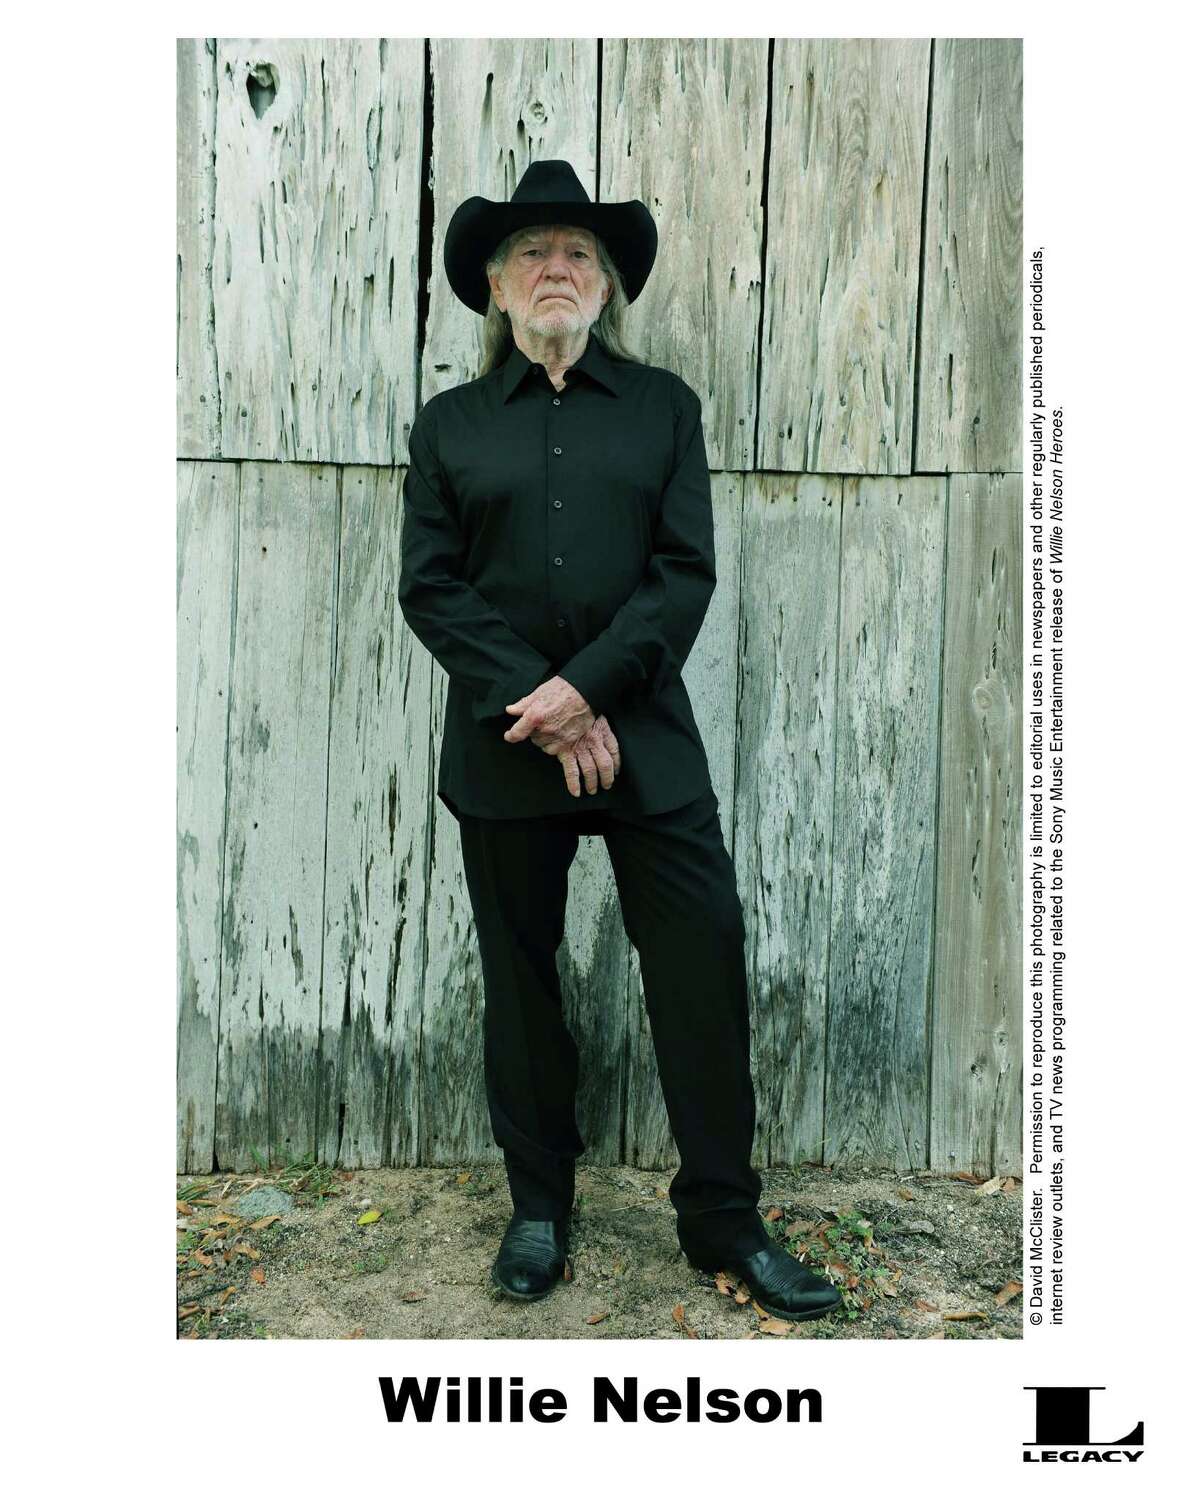 image of Willie Nelson